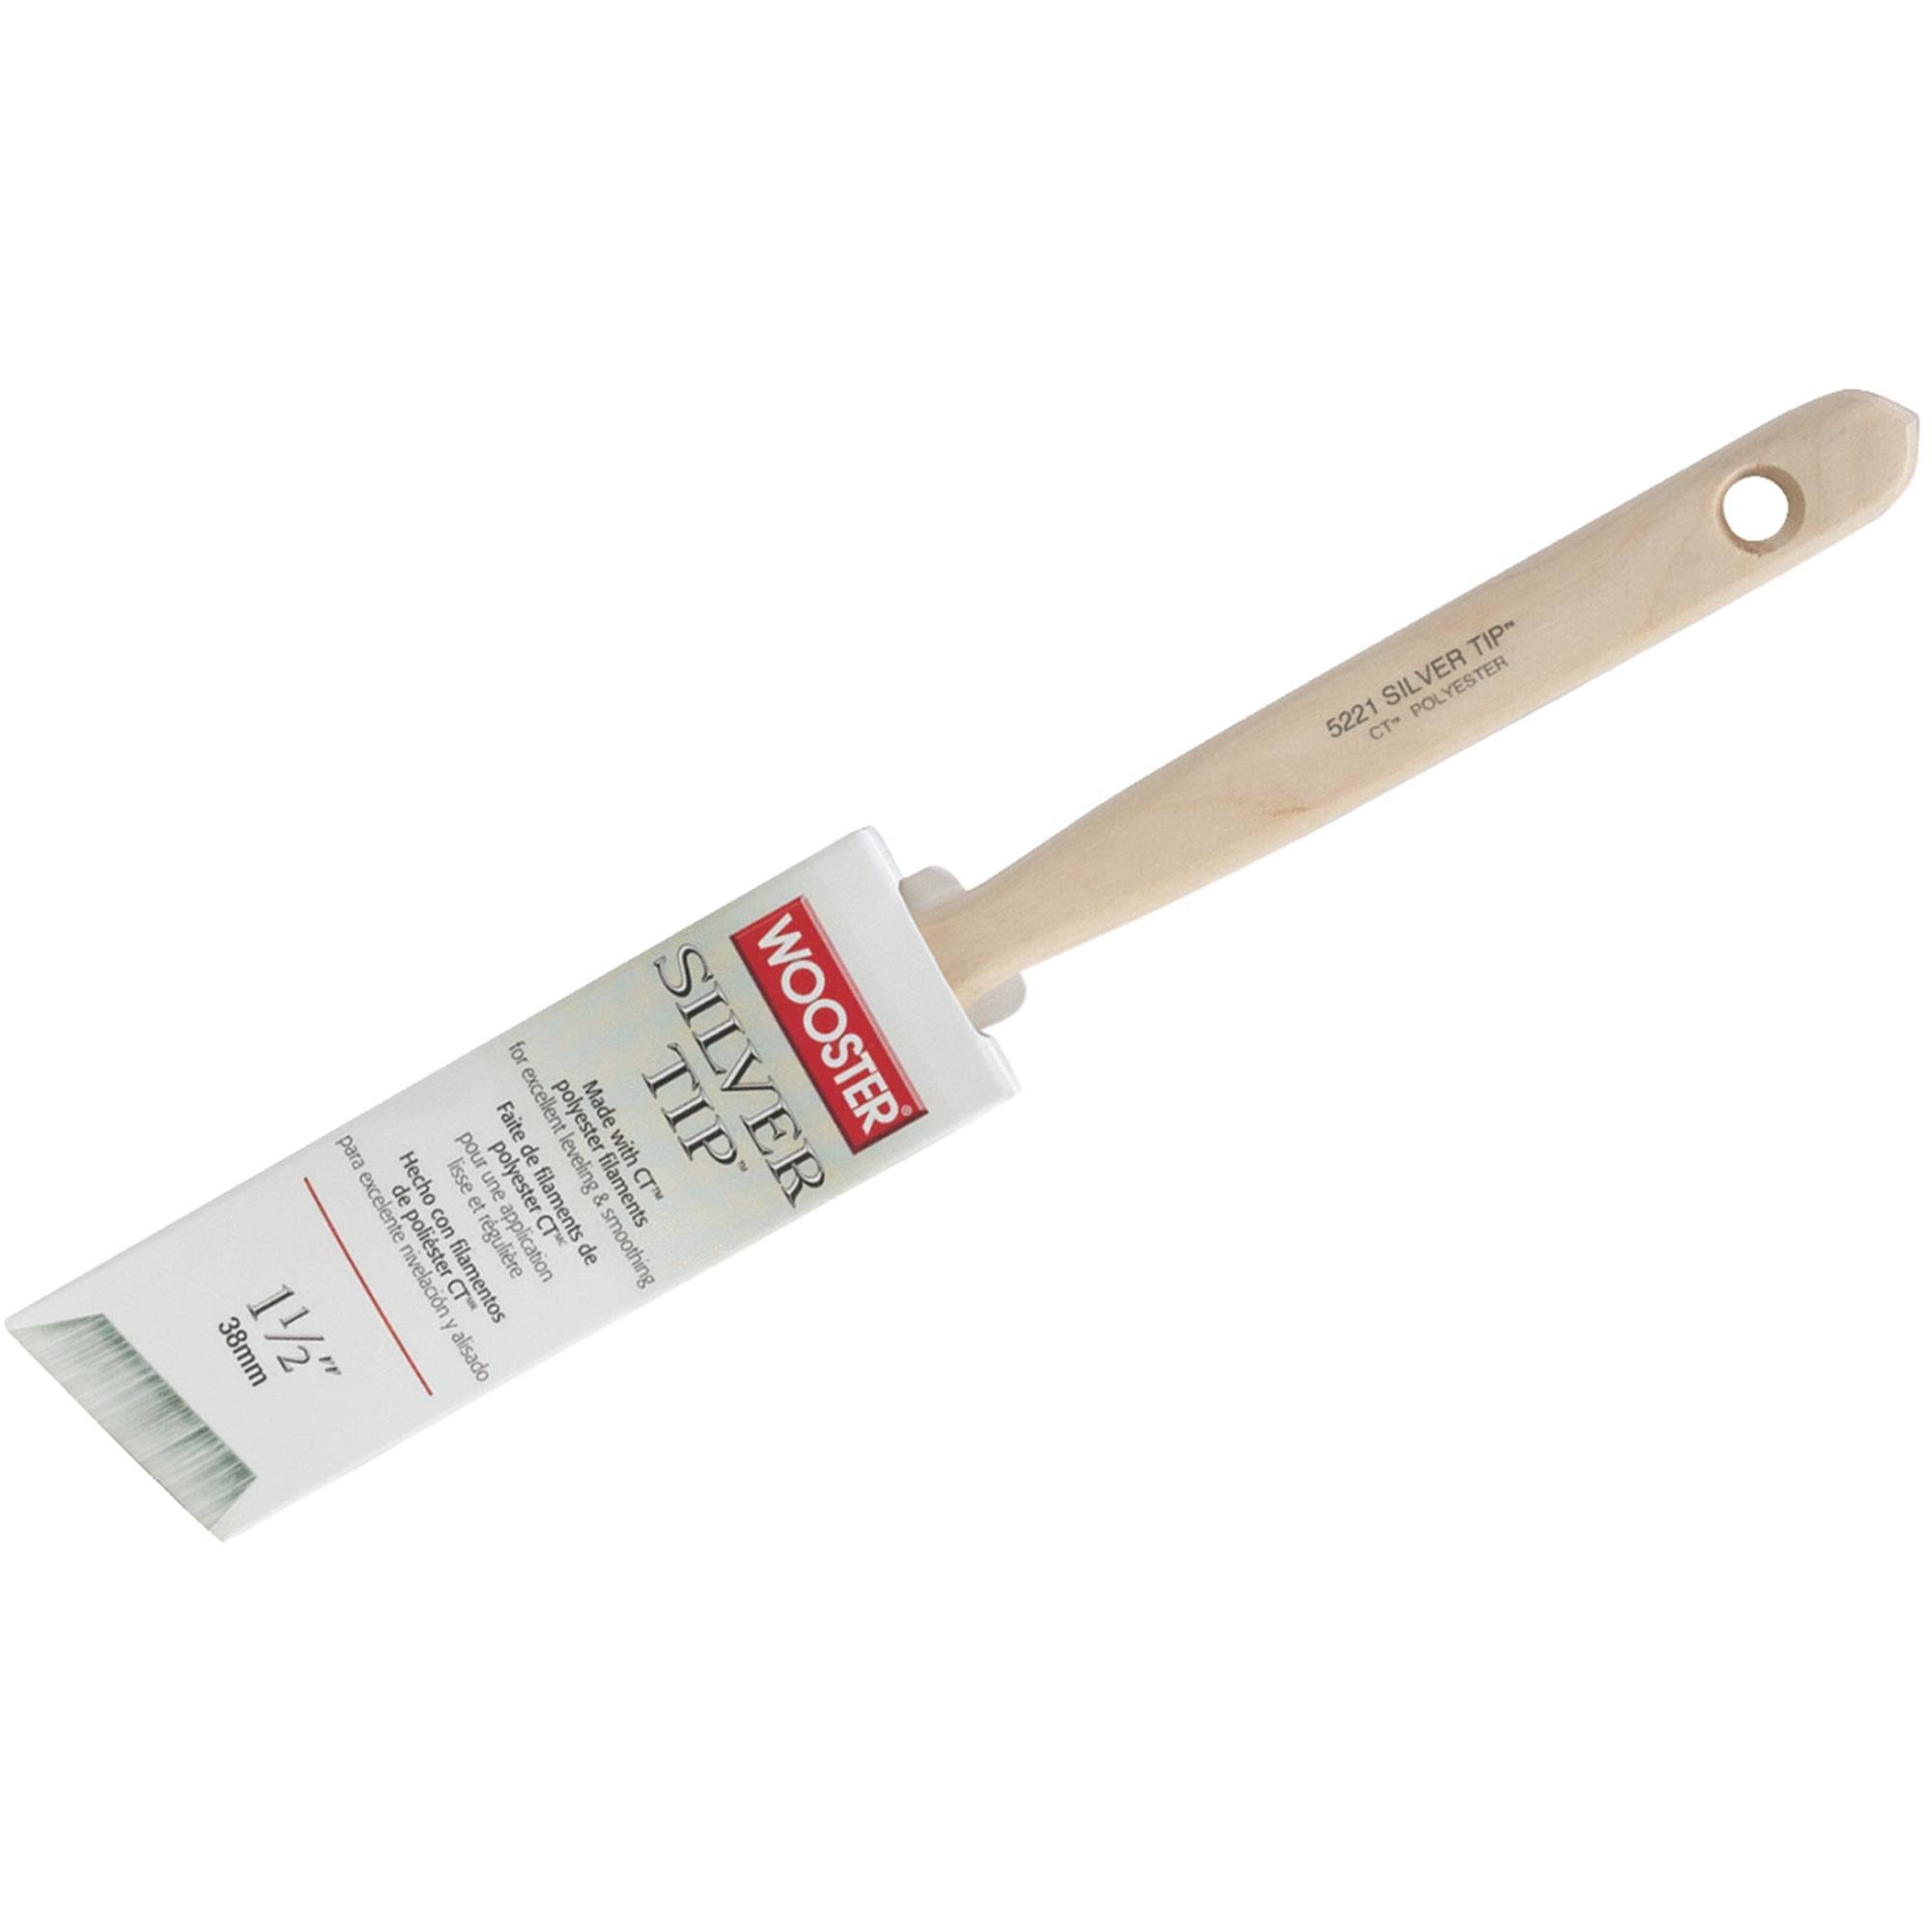 Wooster Silver Tip Angle Sash Paint Brush - 1.5"